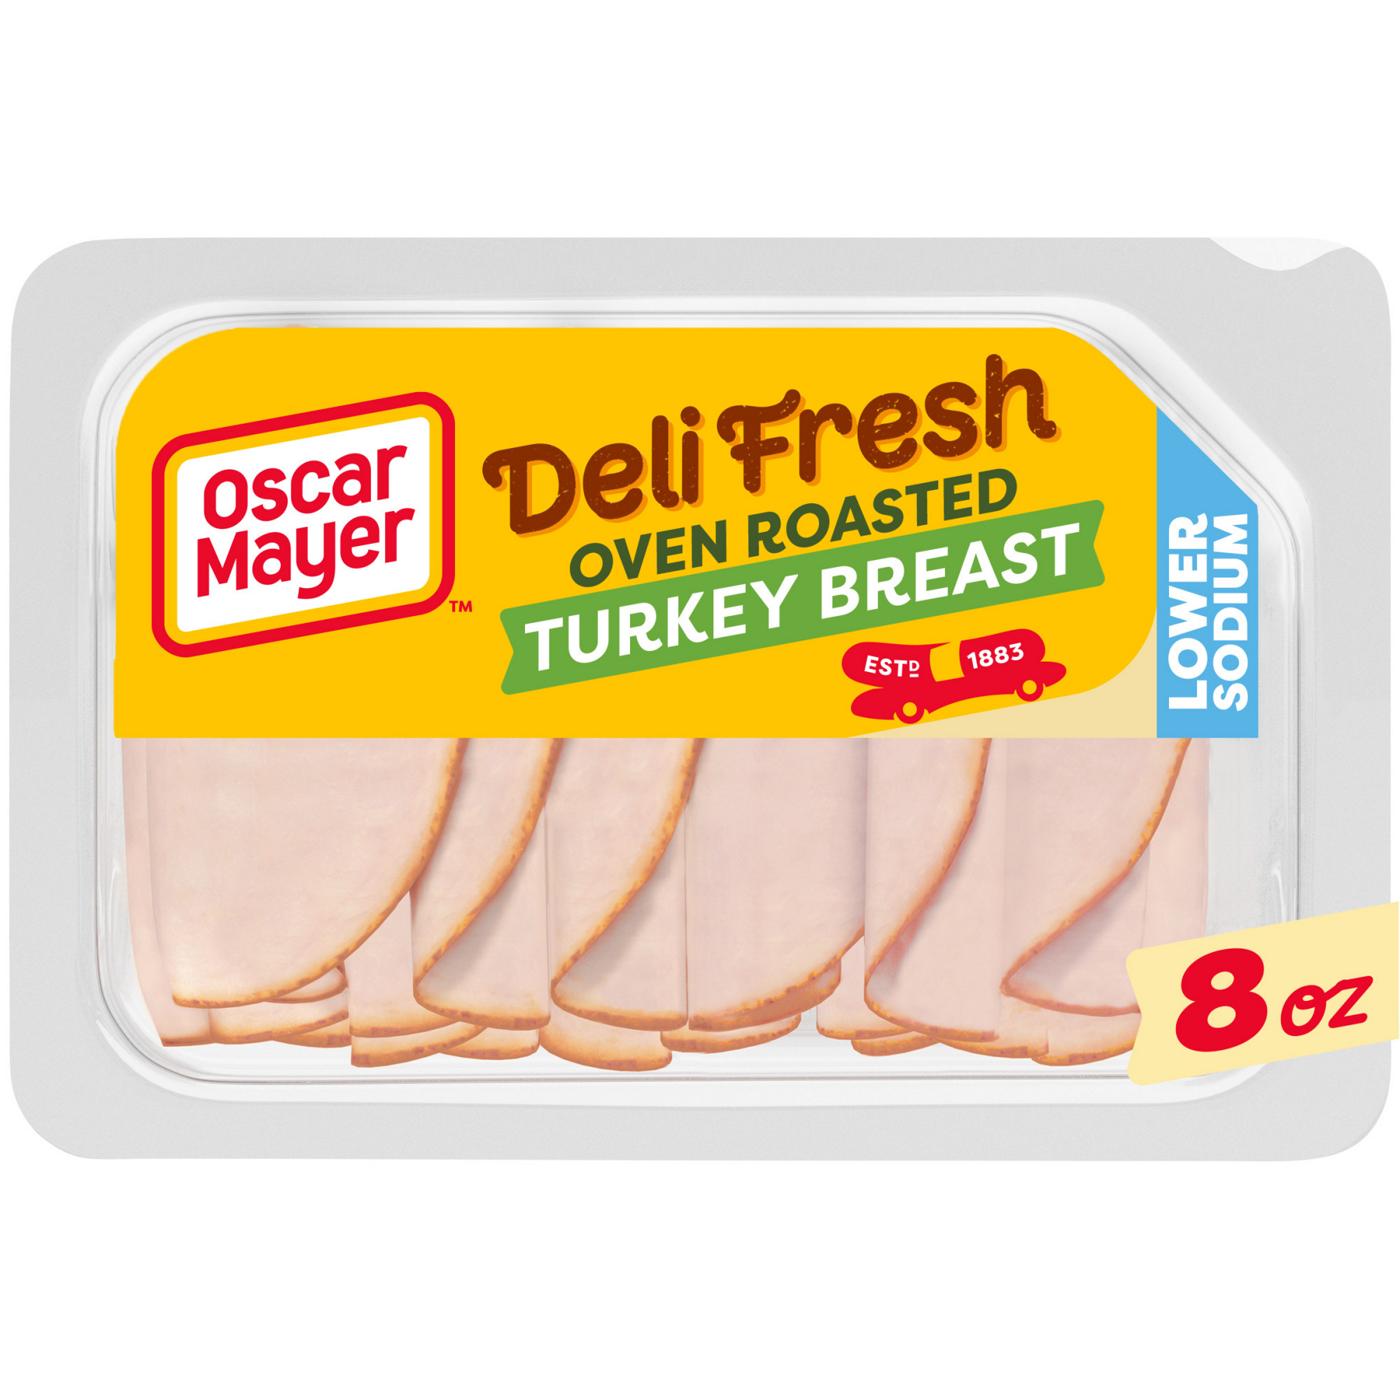 Oscar Mayer Deli Fresh Lower Sodium Oven Roasted Sliced Turkey Breast Lunch Meat; image 1 of 6